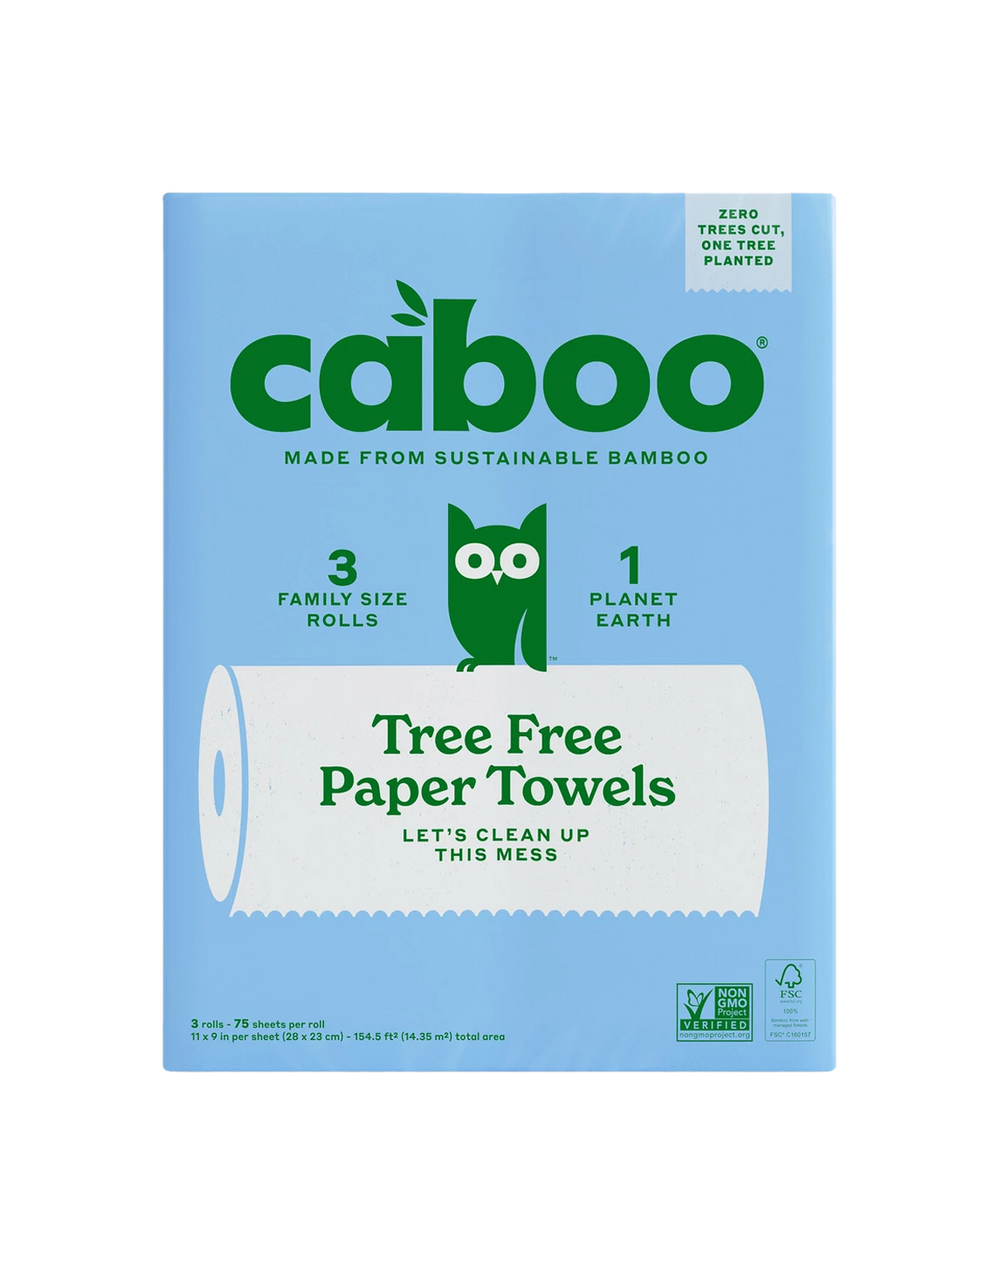 Tree-Free Paper Towels, Caboo, 3 pack Caboo